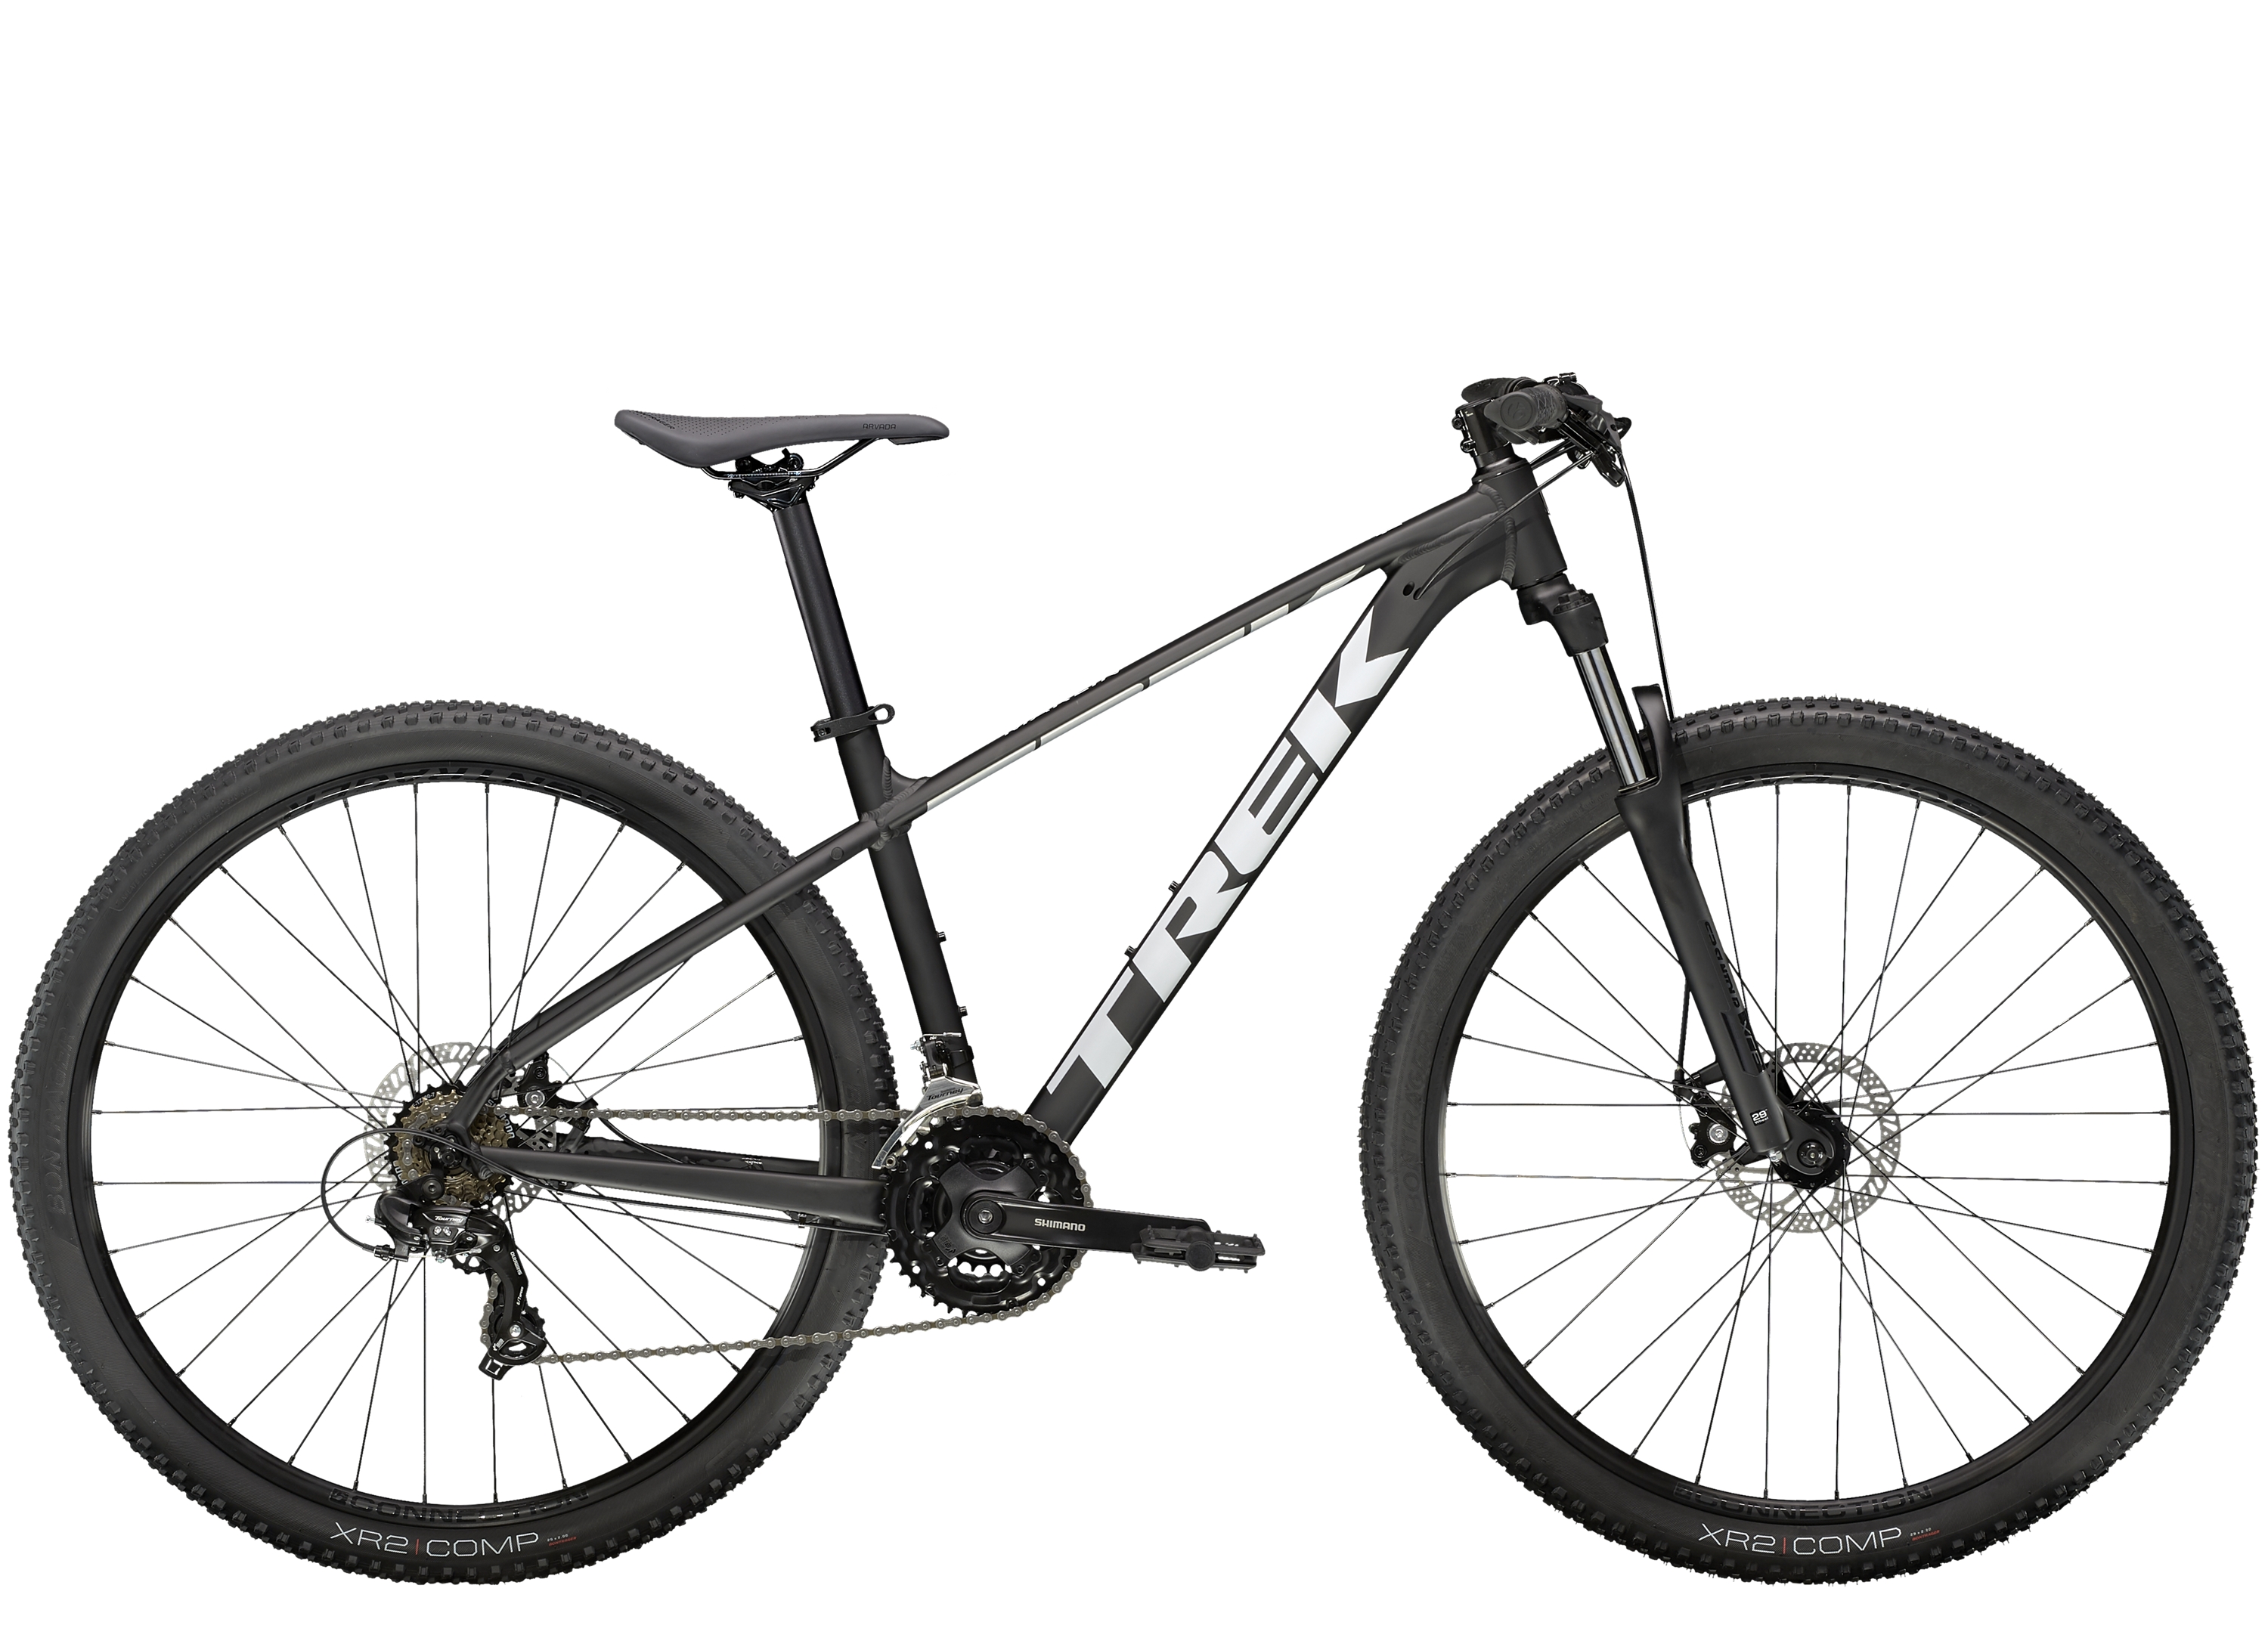 <a href="https://cycles-clement.be/product/marlin-4-m-29-matte-trek-black/">Marlin 4 M 29 Matte Trek Black</a>